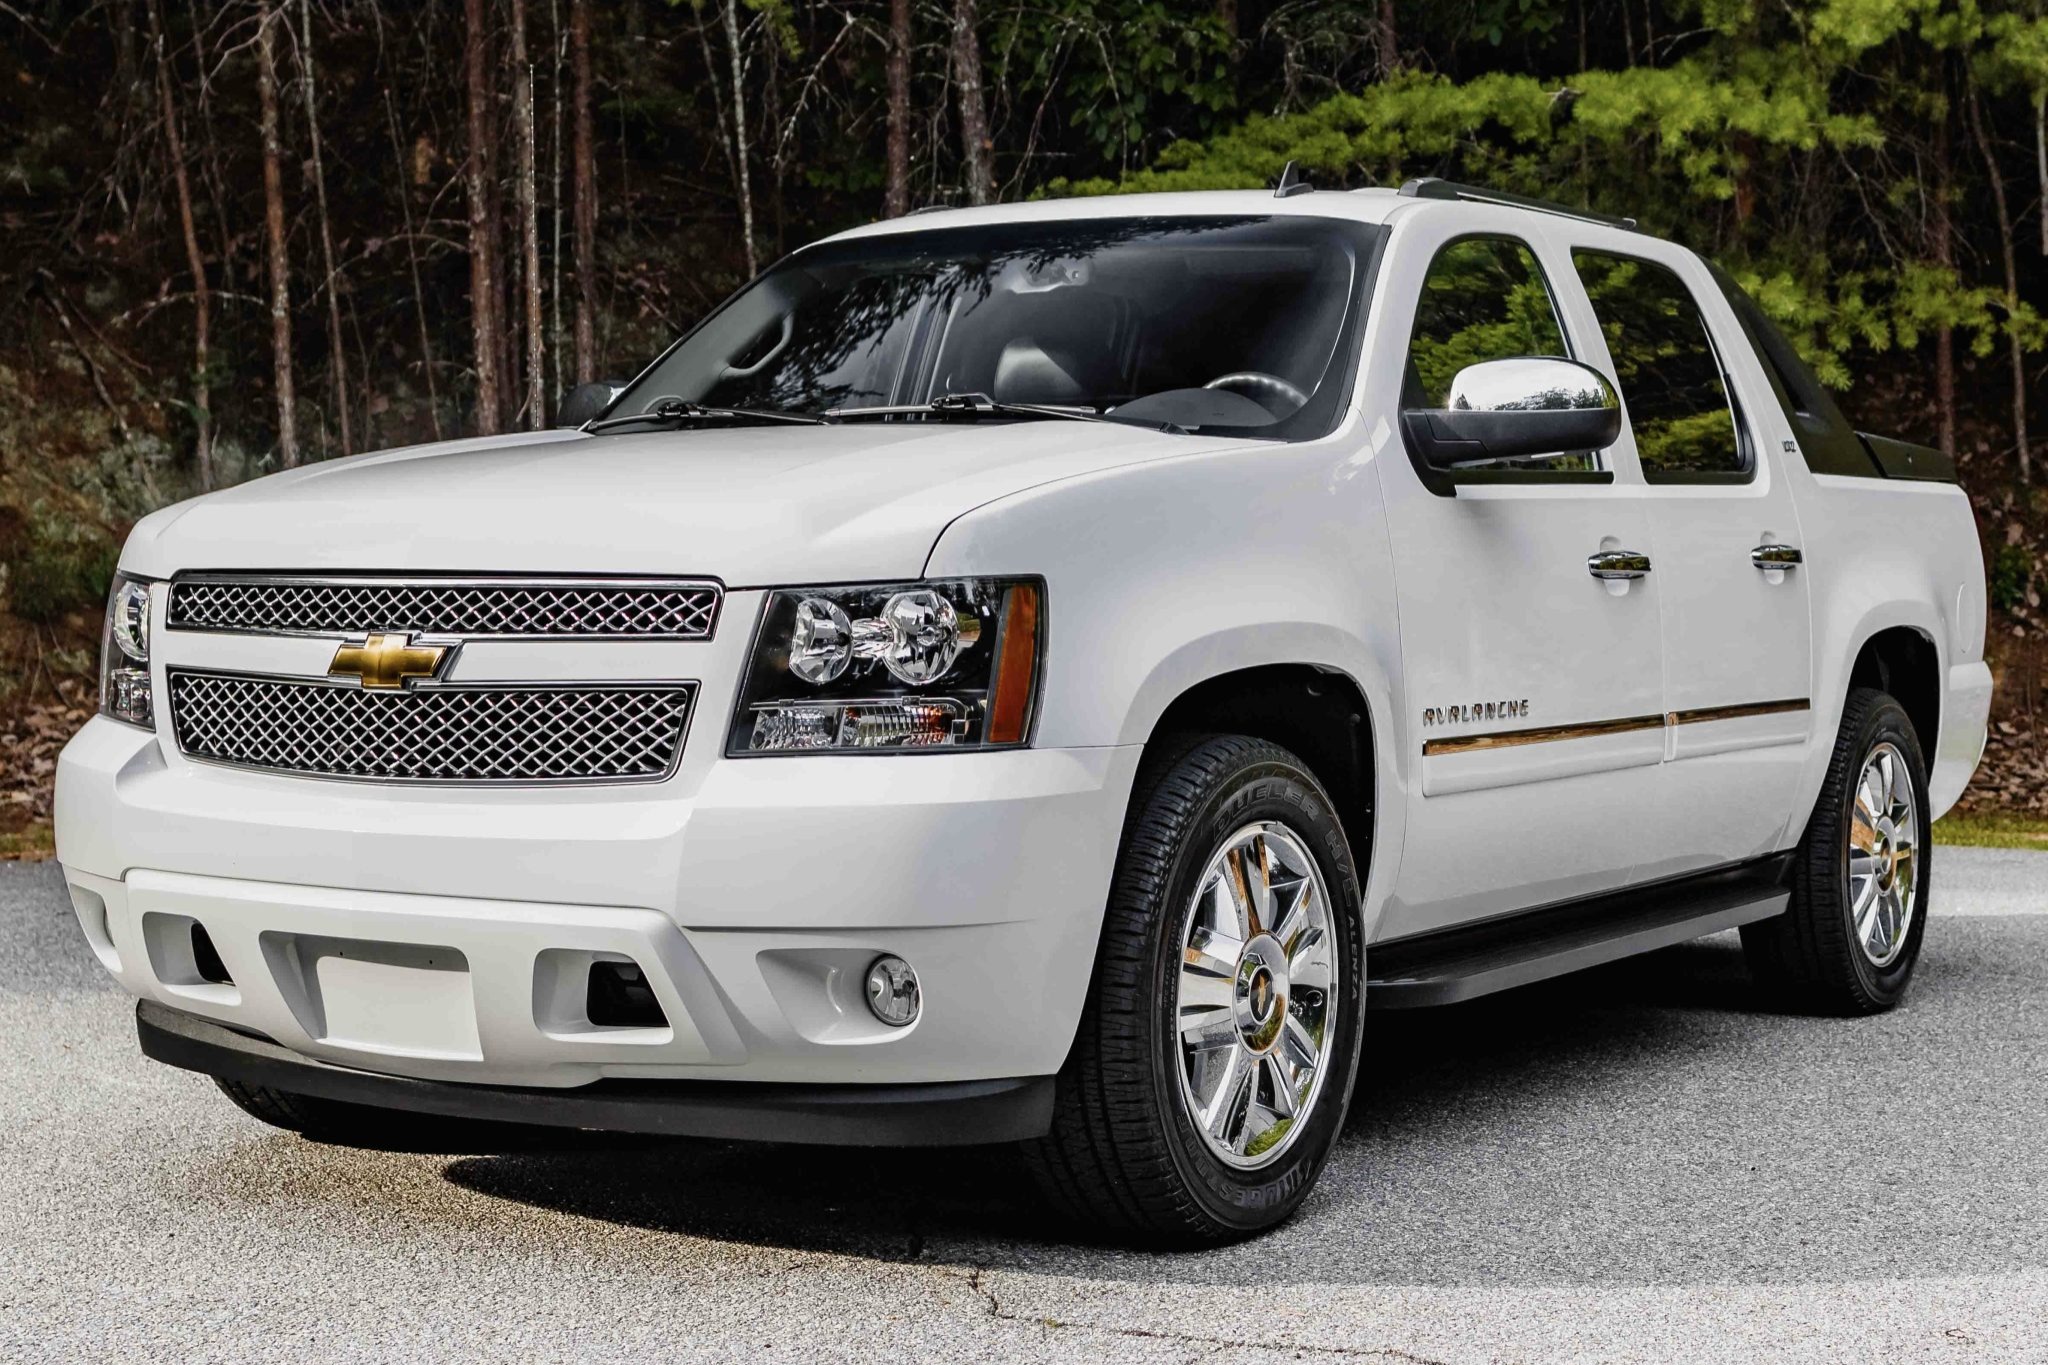 Used 8k-Mile 2010 Chevrolet Avalanche LTZ Review